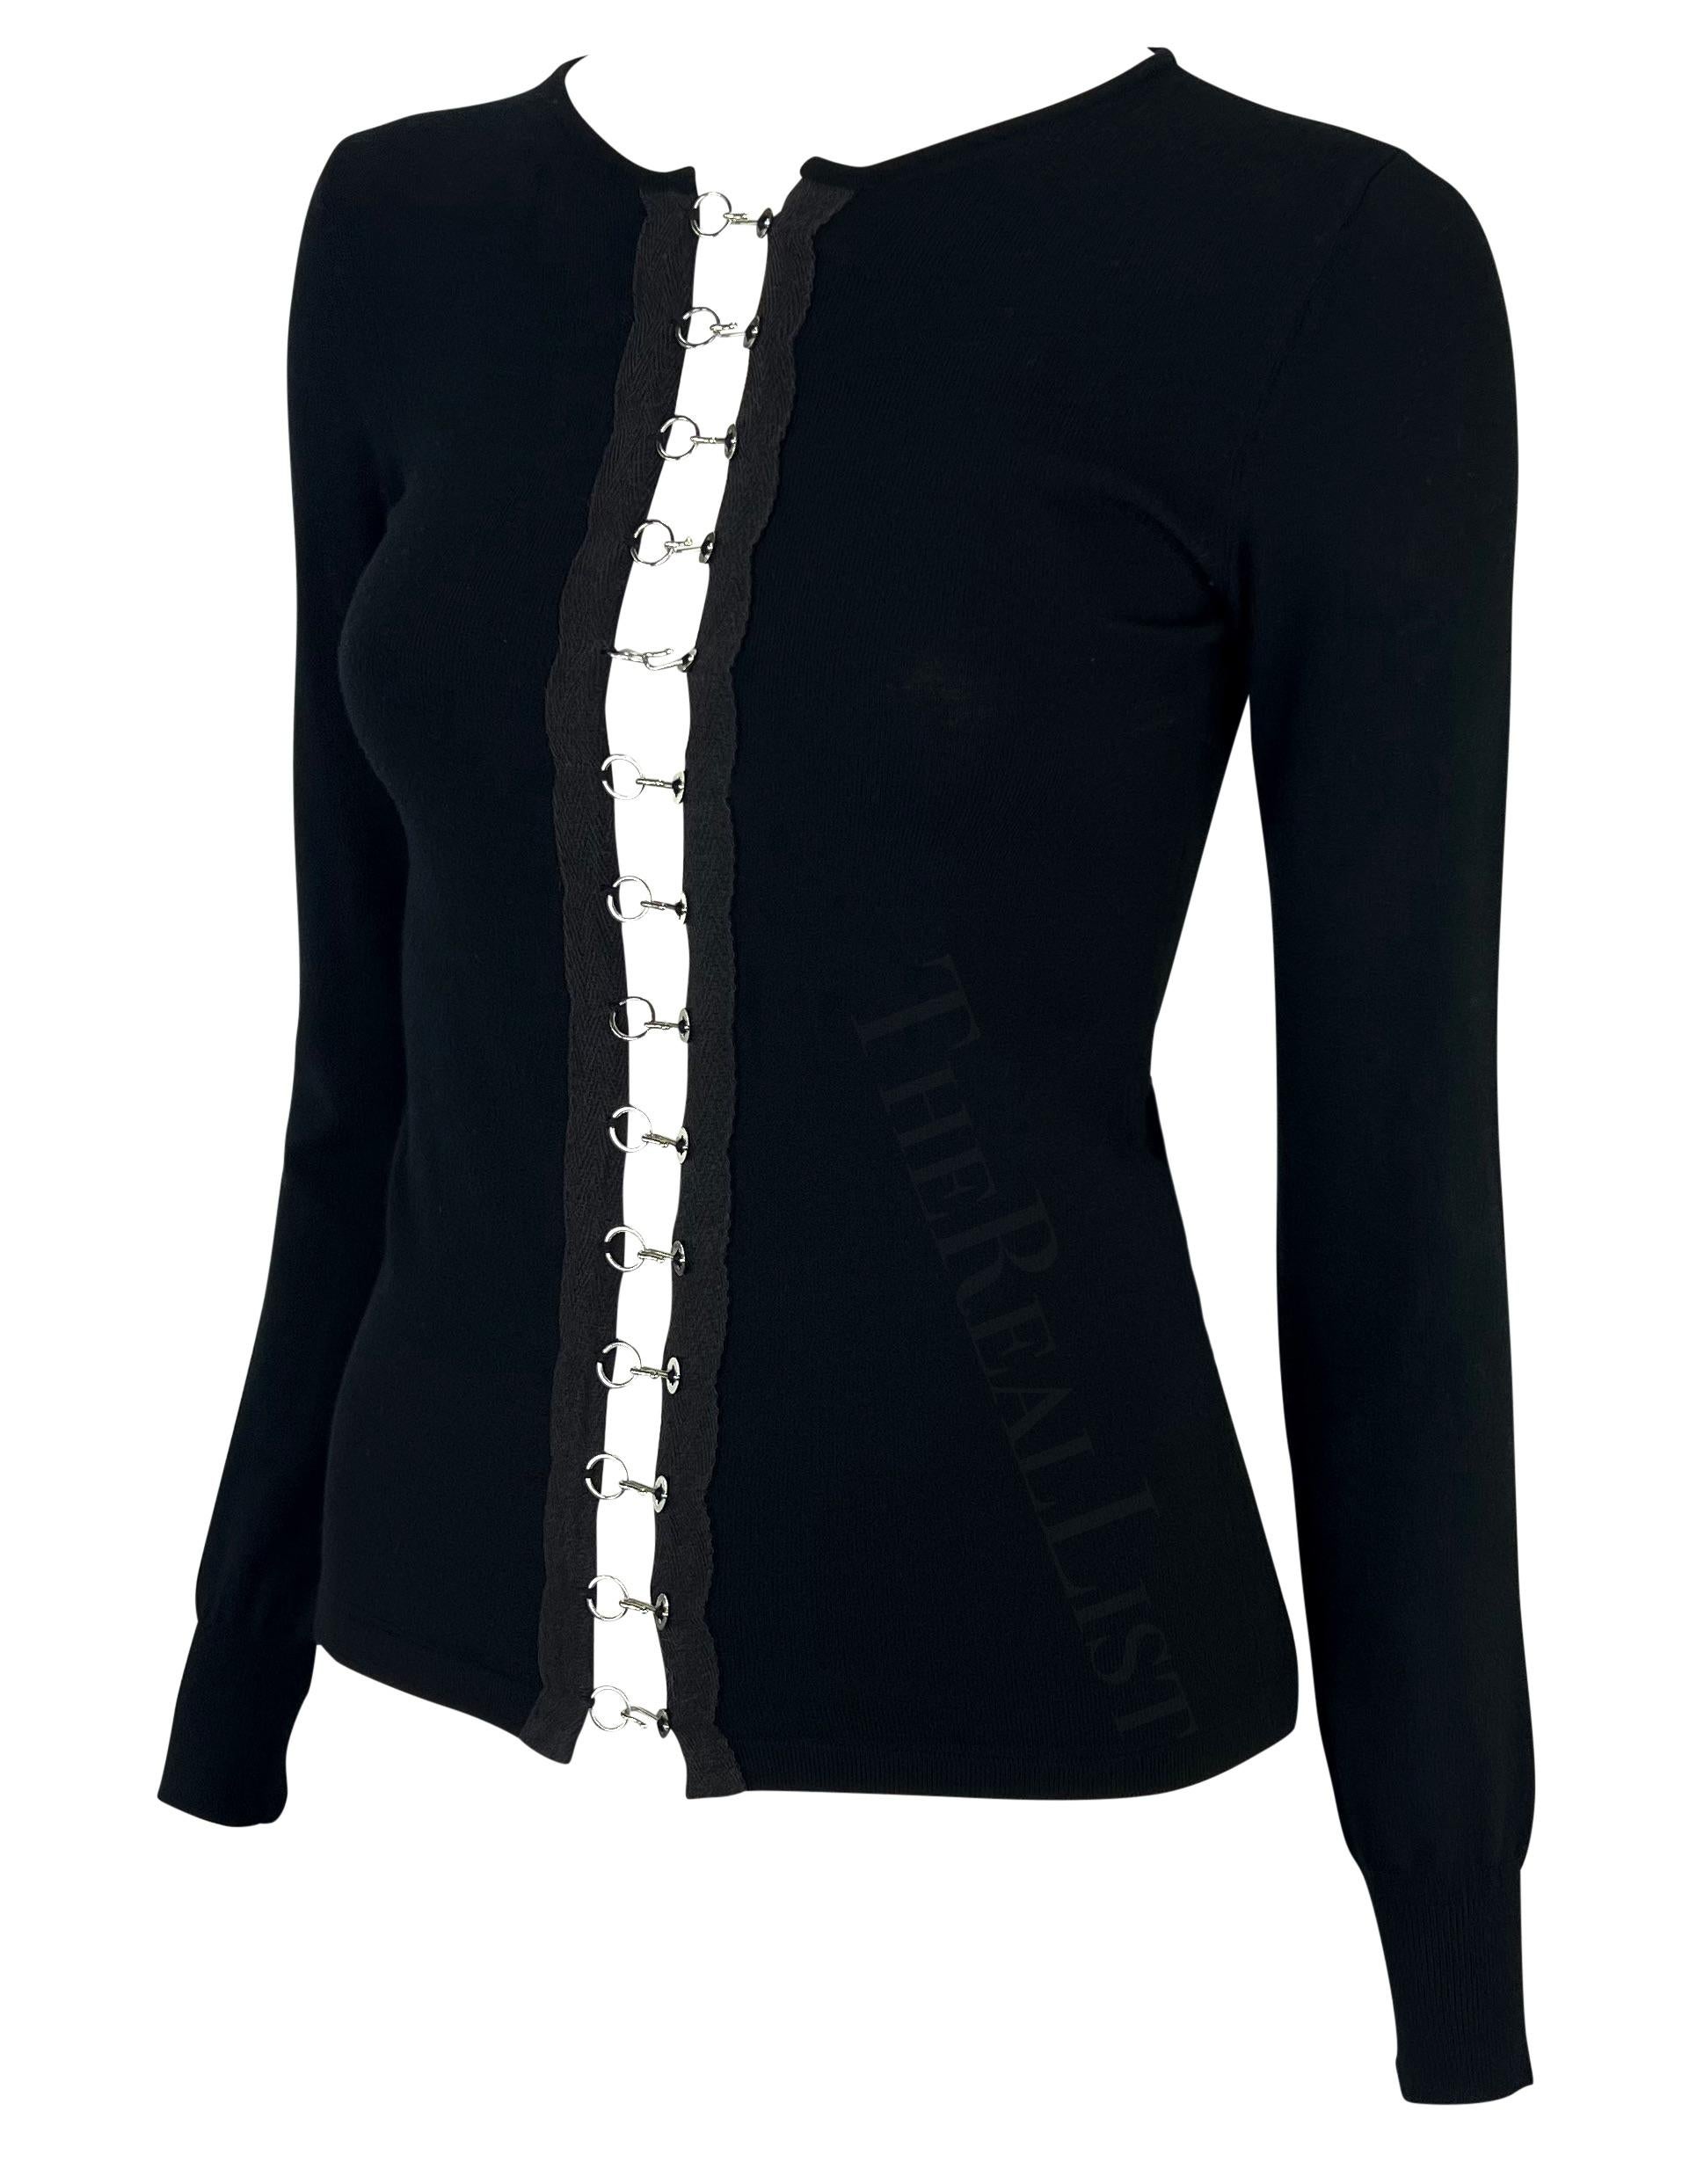 Presenting a fabulous black knit Dolce and Gabbana cardigan. From the early 2000s, this form-fitting cardigan is made complete with silver-tone hook closures that run down the front of the top. Add this edge and elevated closet staple to your